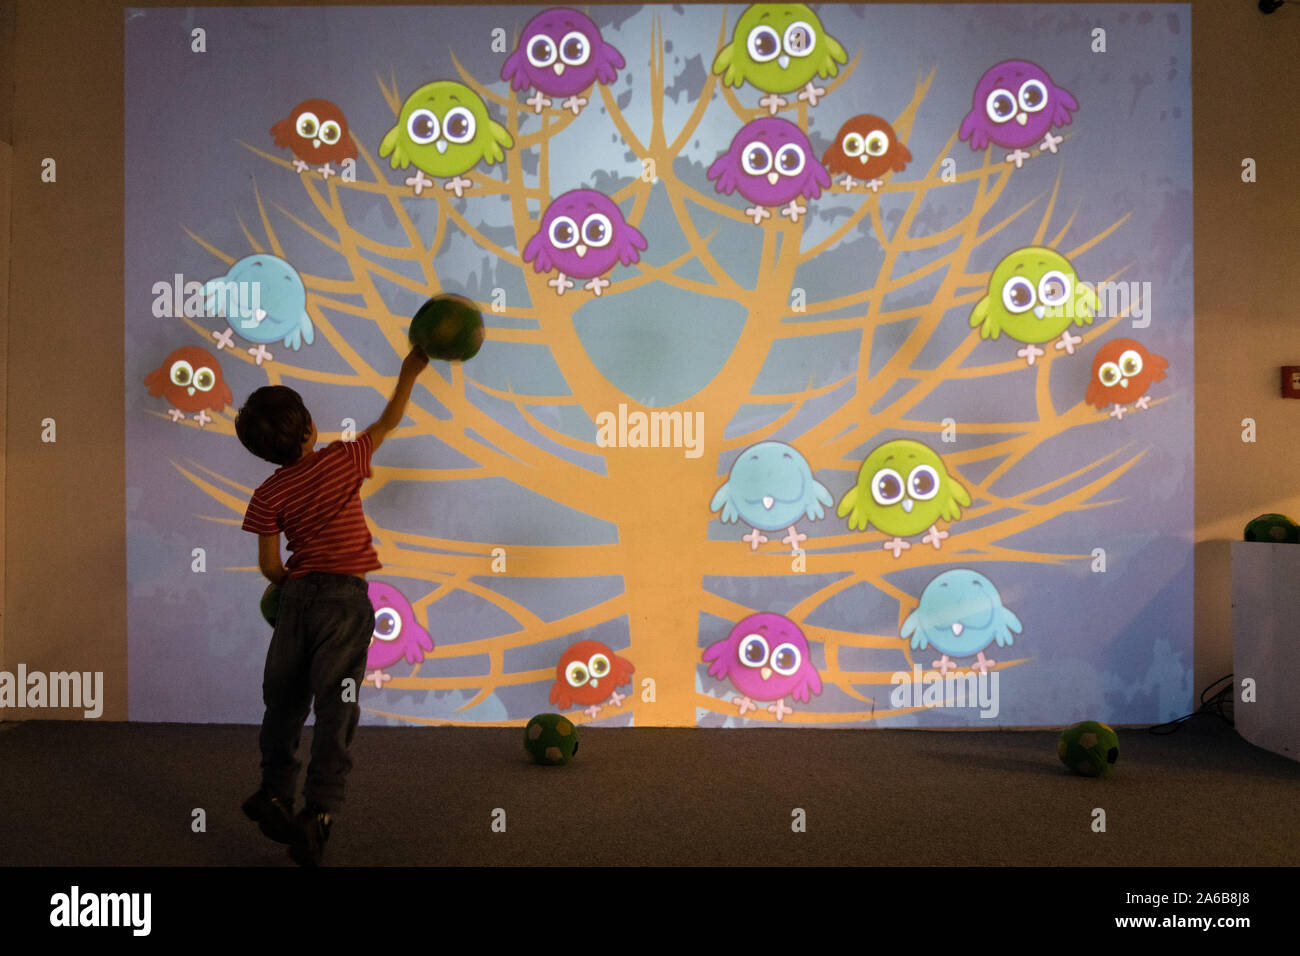 BRATISLAVA, SLOVAKIA - OCT 25, 2019: Kids playing interactive game projected to the wall at the mall in Bratislava, Slovakia Stock Photo